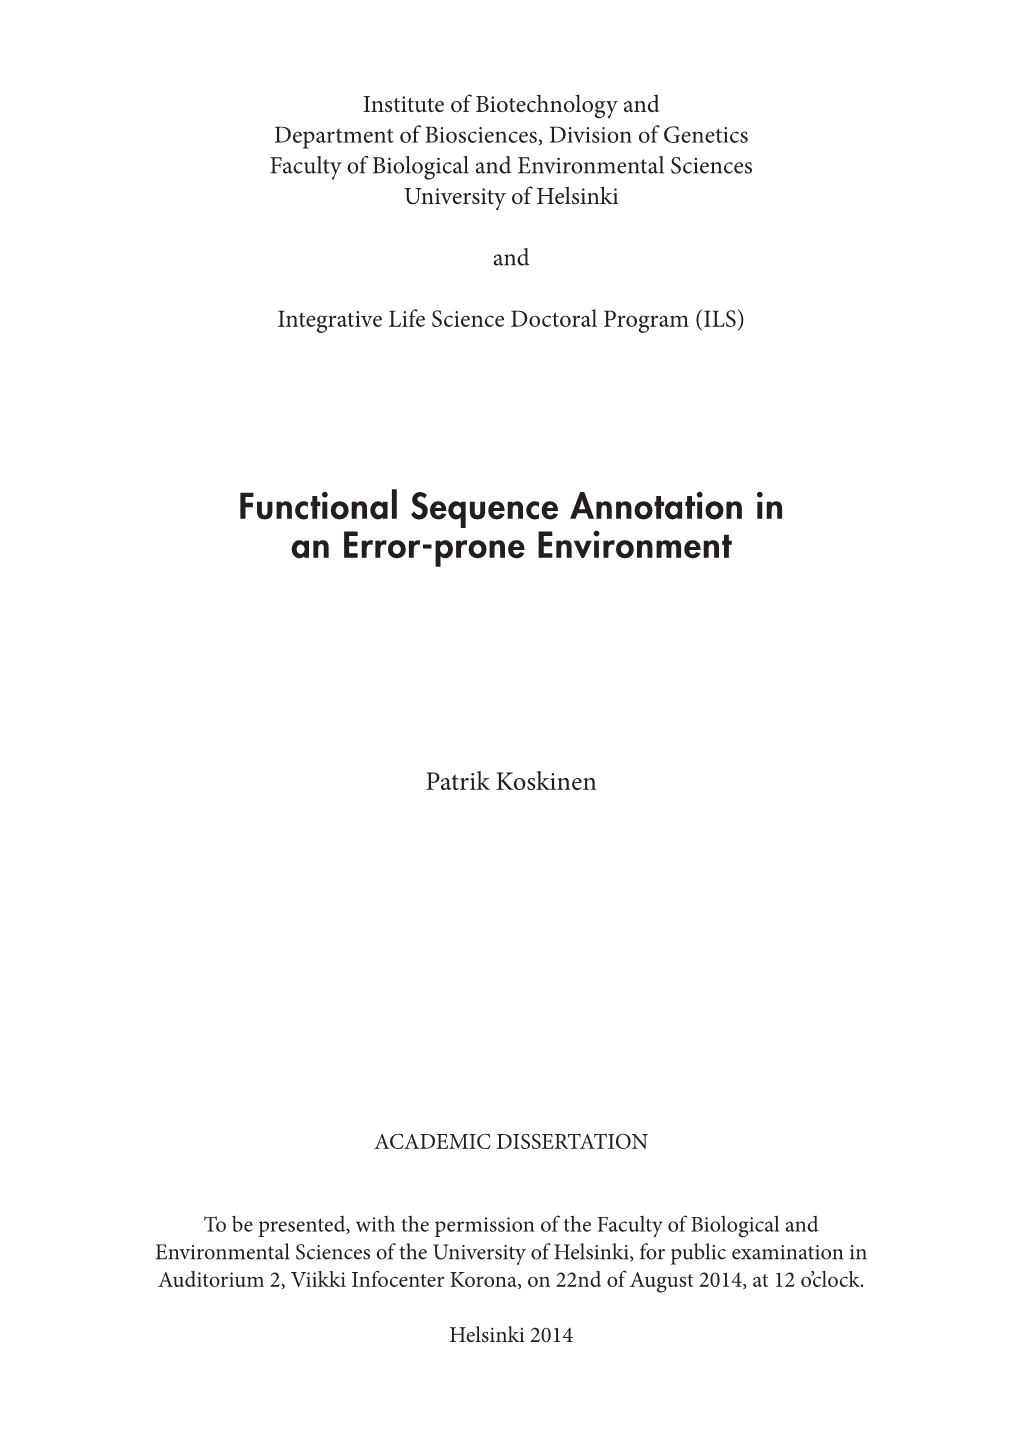 Functional Sequence Annotation in an Error-Prone Environment